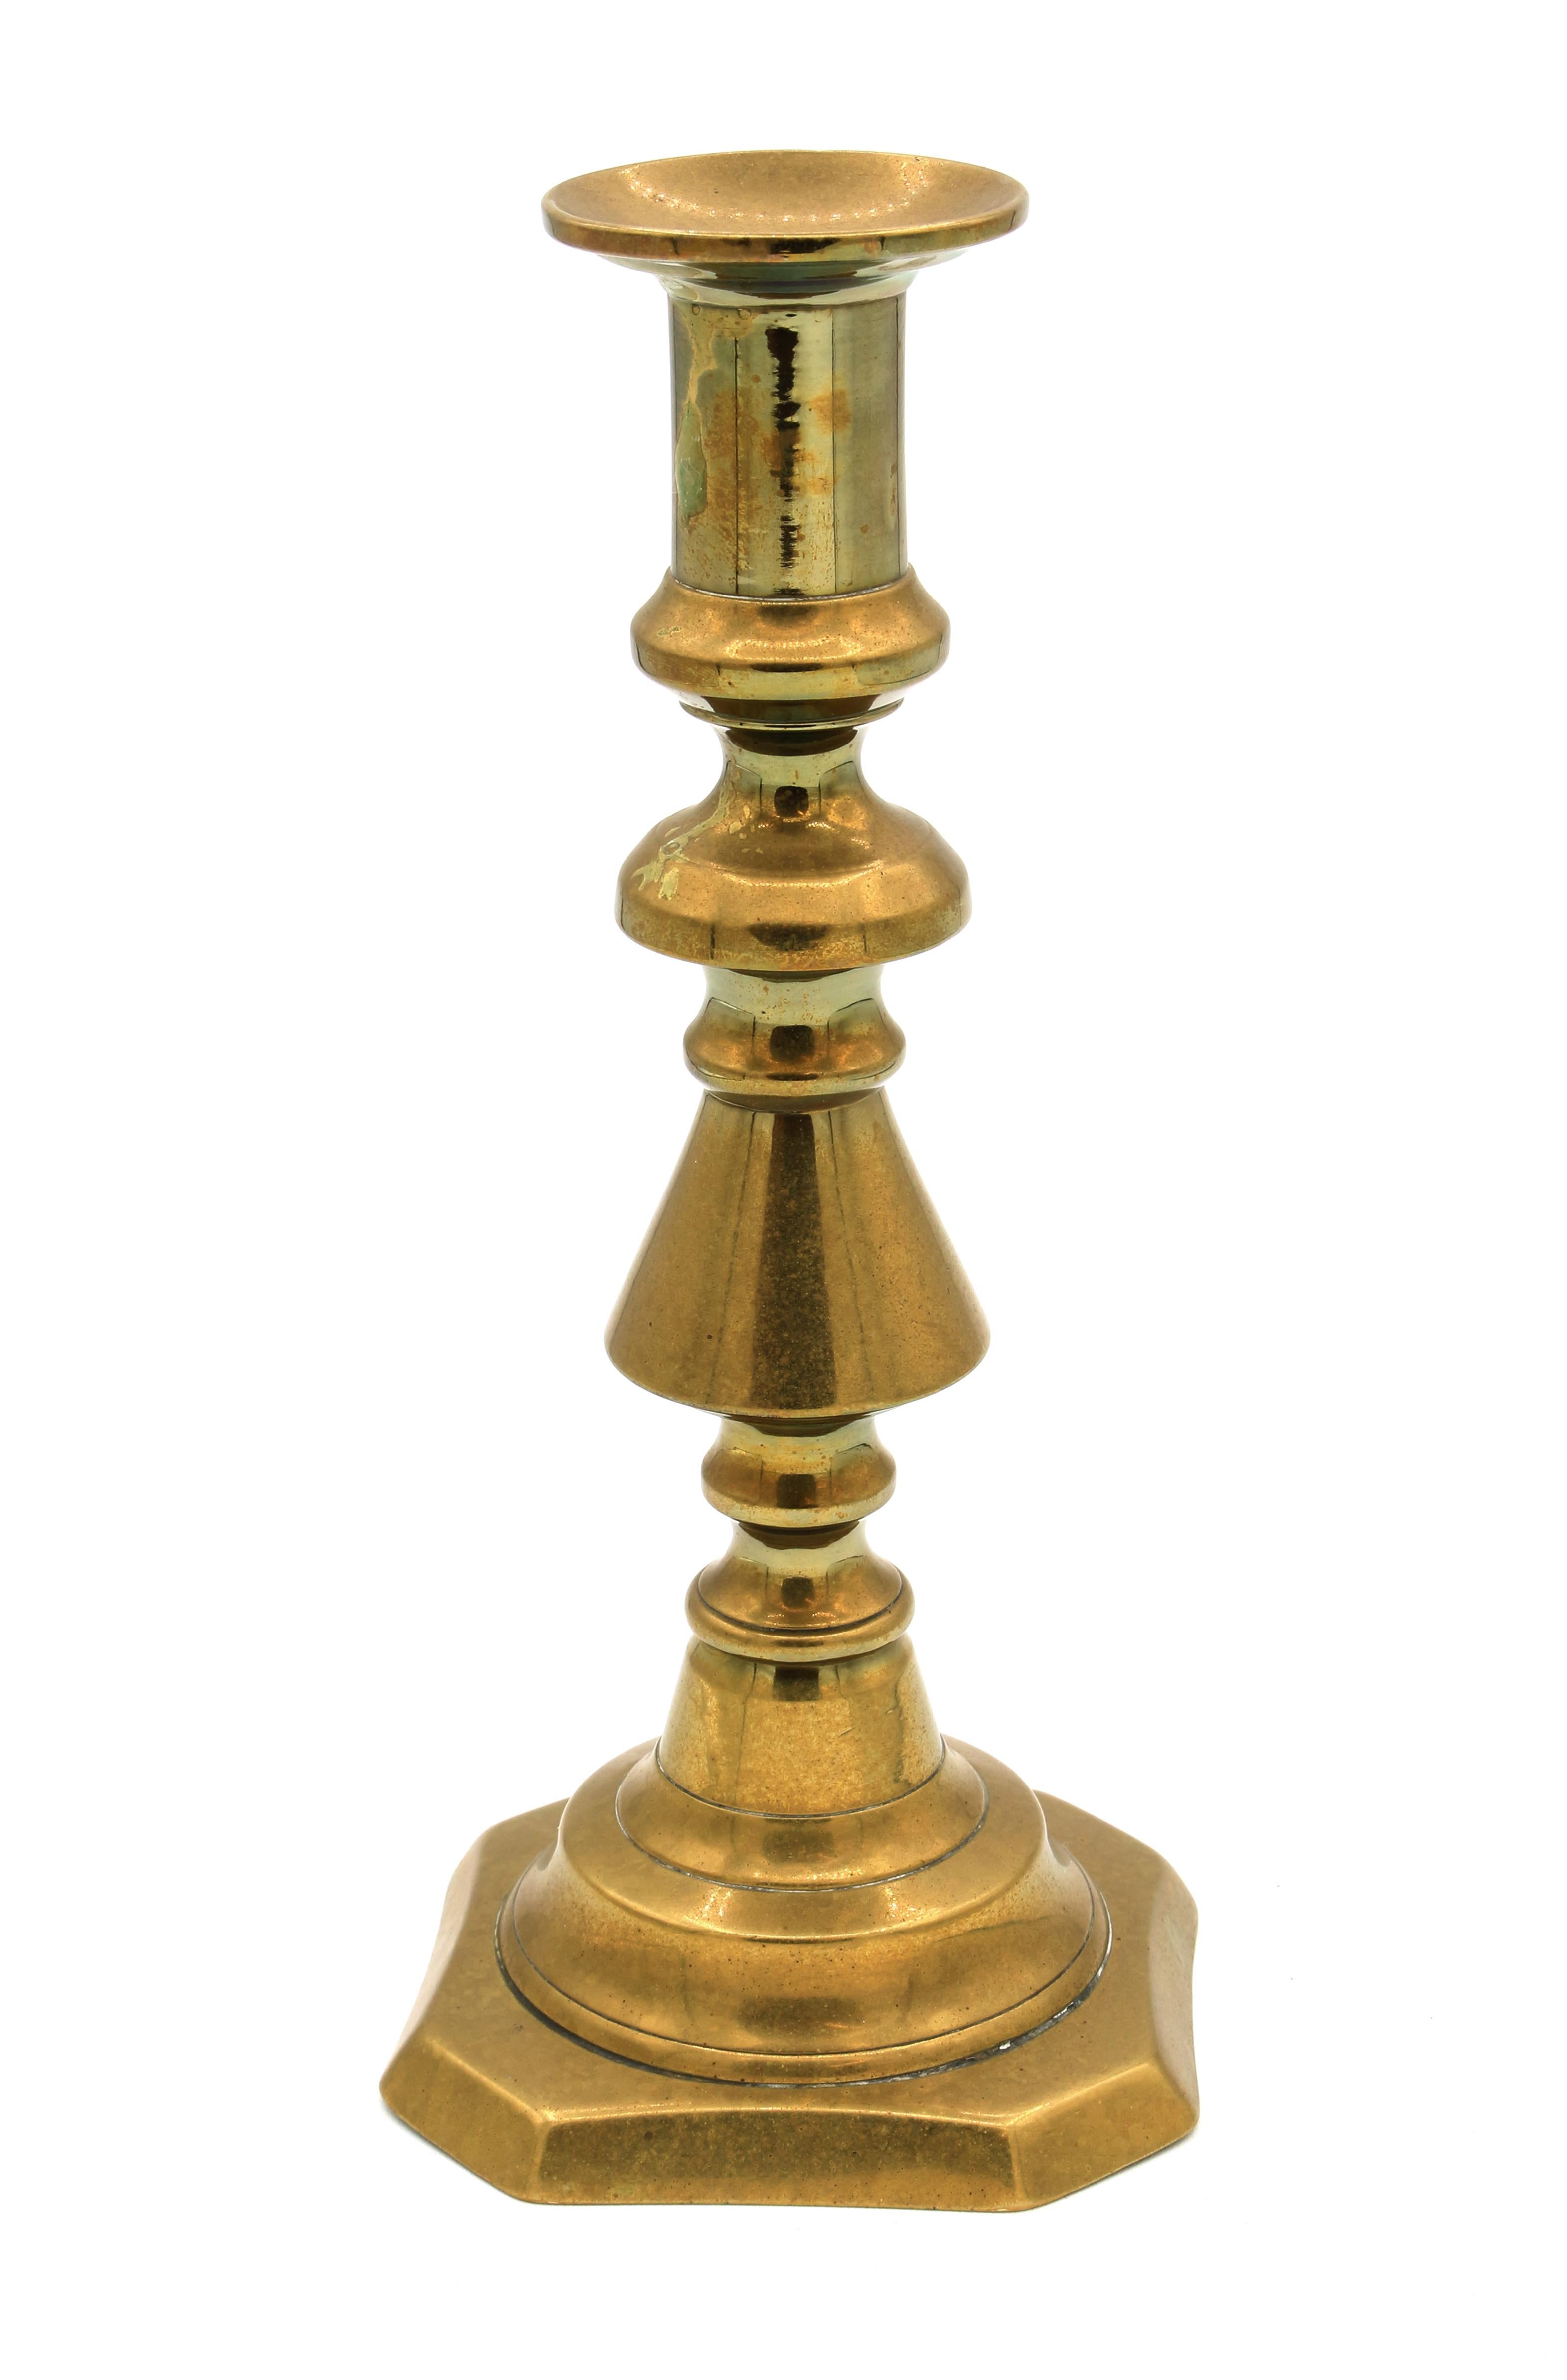 circa 1860-1880 Pair of English Brass Candlesticks In Good Condition For Sale In Chapel Hill, NC